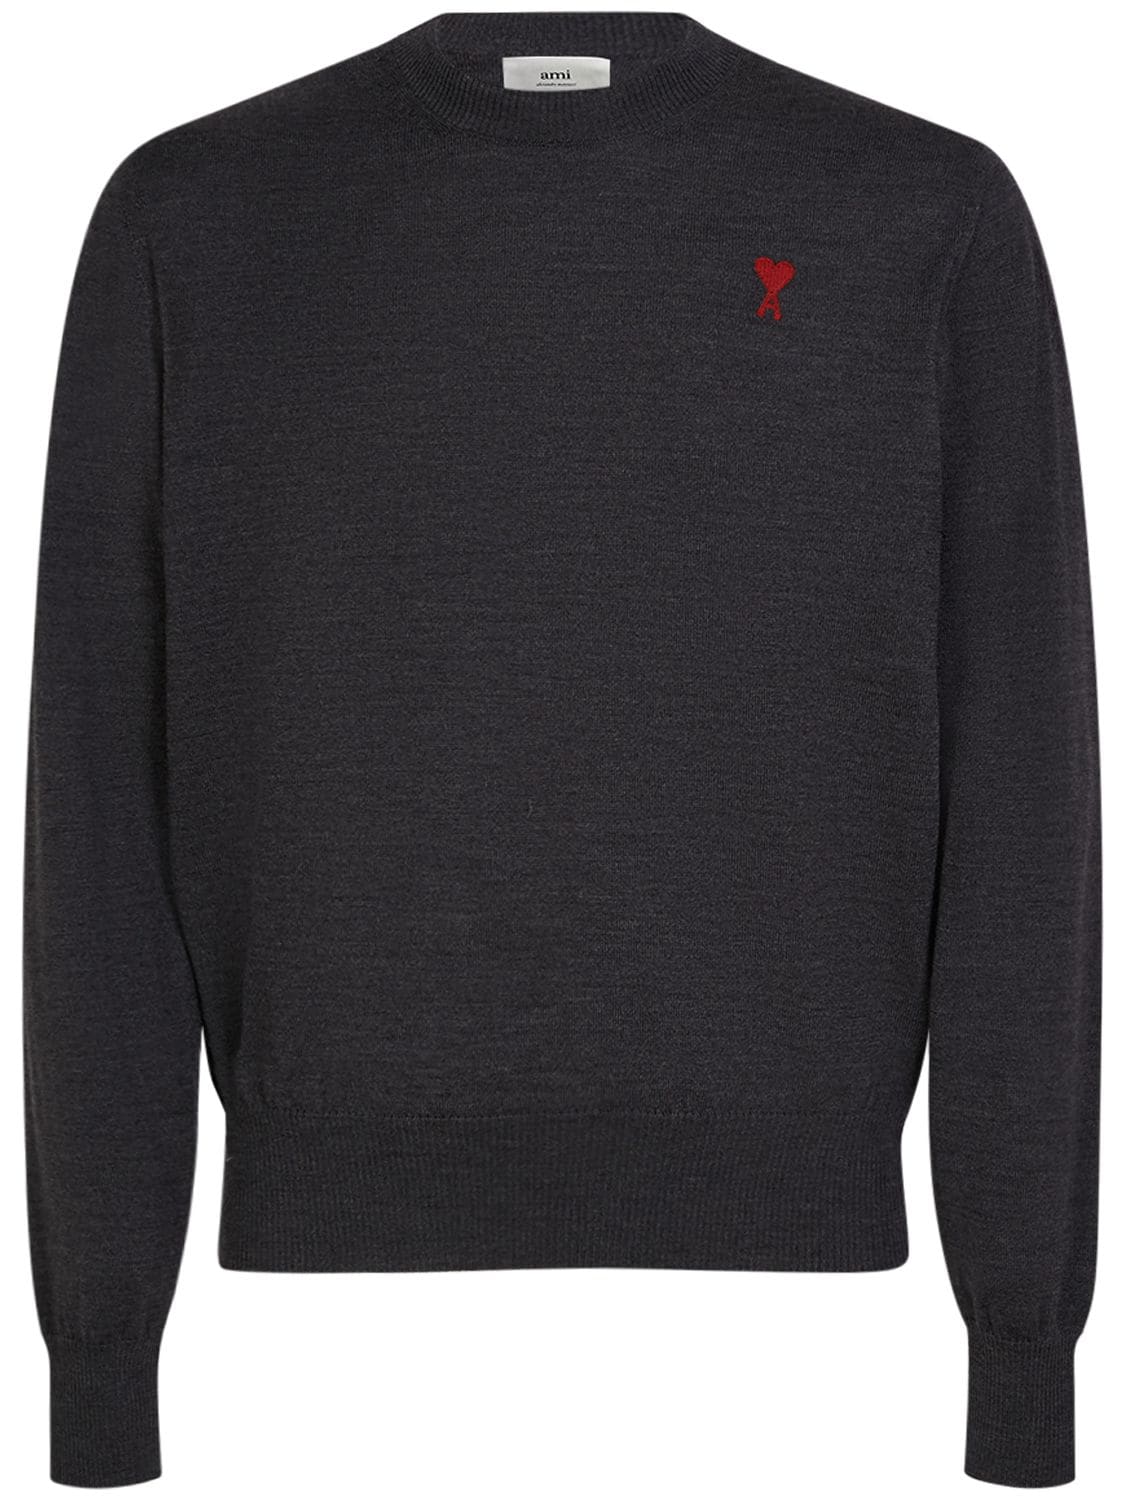 Image of Adc Wool Sweater